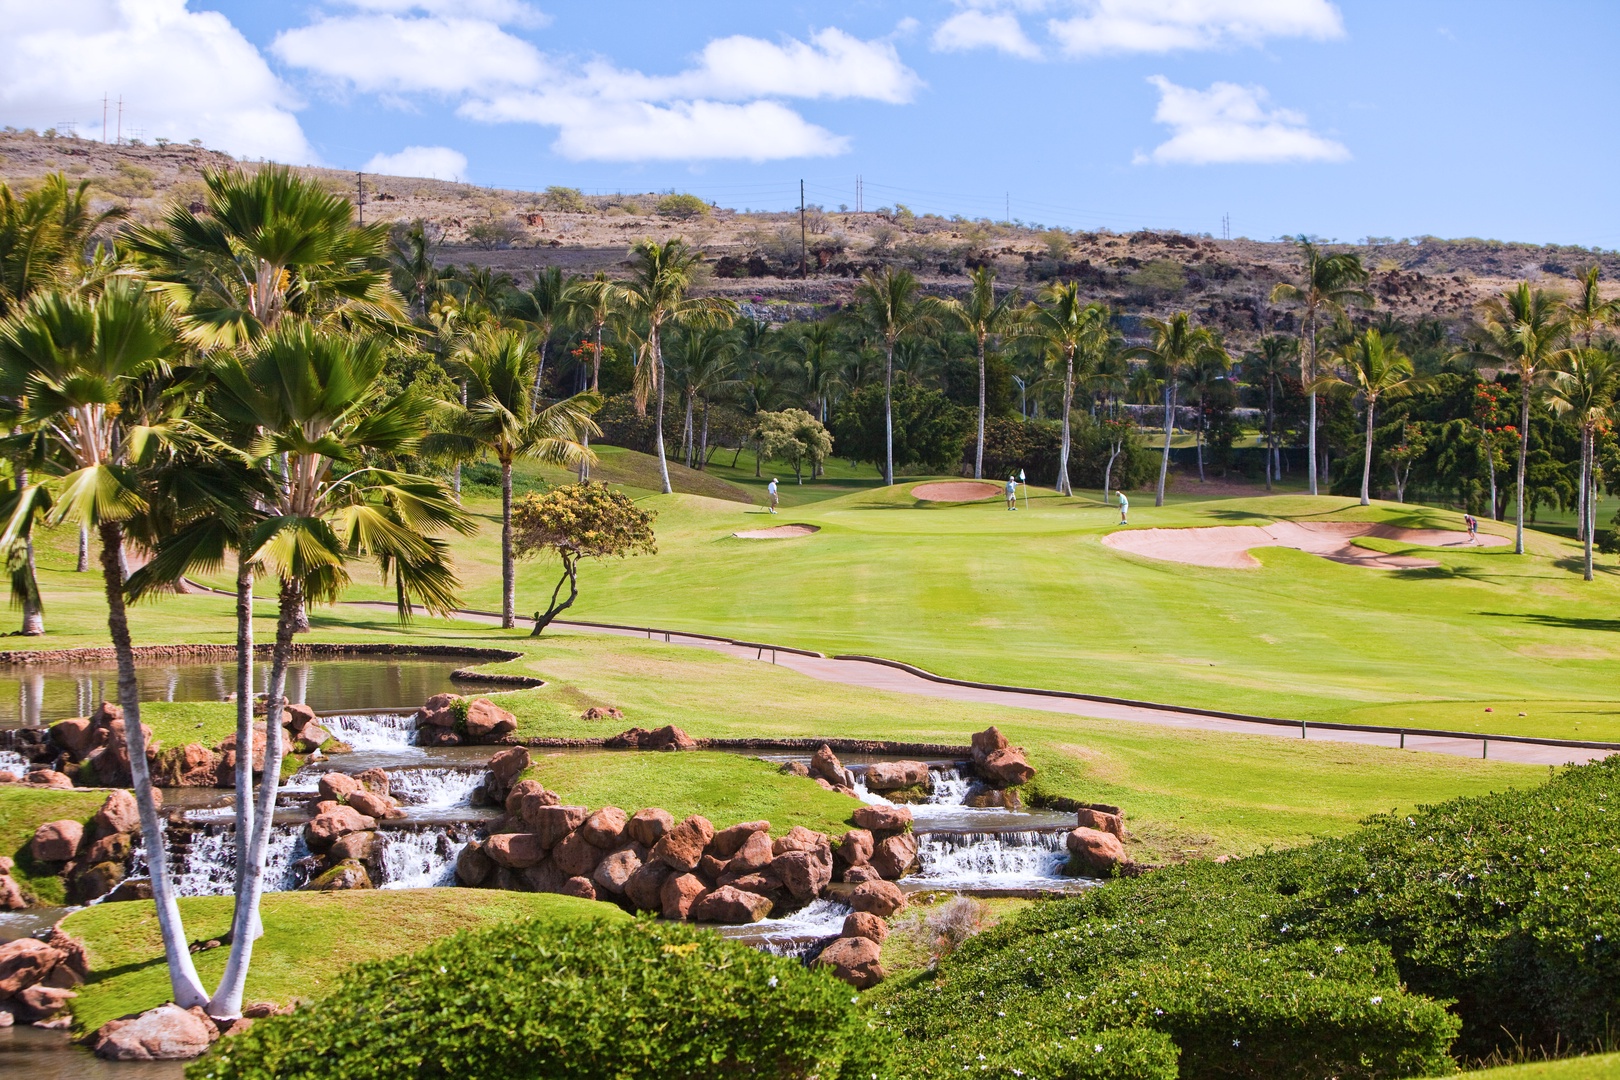 Kapolei Vacation Rentals, Kai Lani 20C - The scenic golf course with lush greenery and cascading waterfalls.